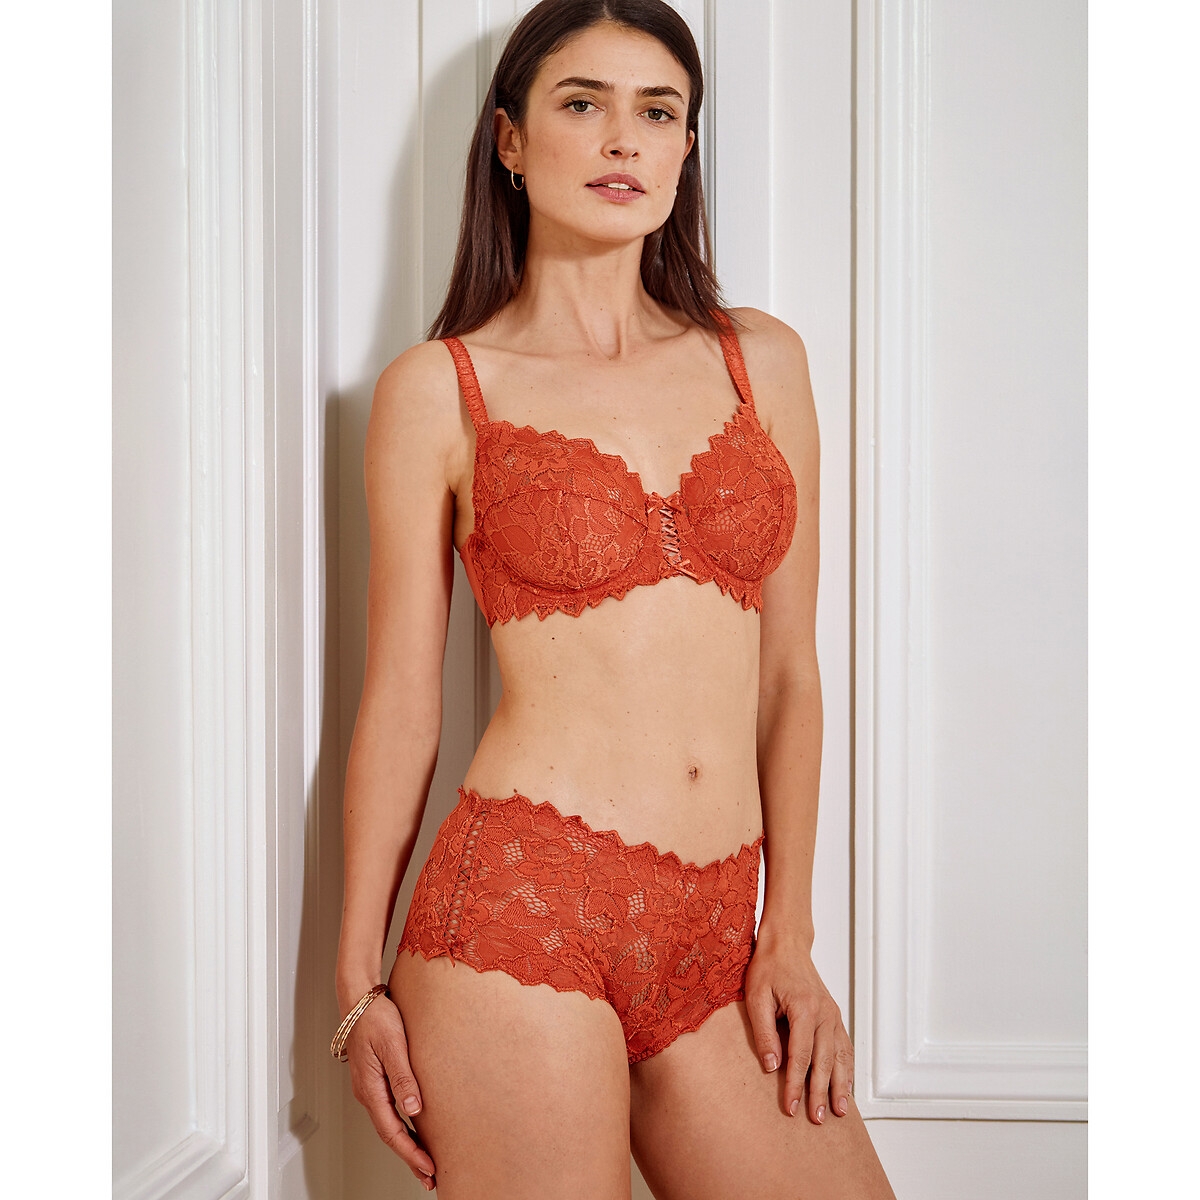 Arum Lace Knickers